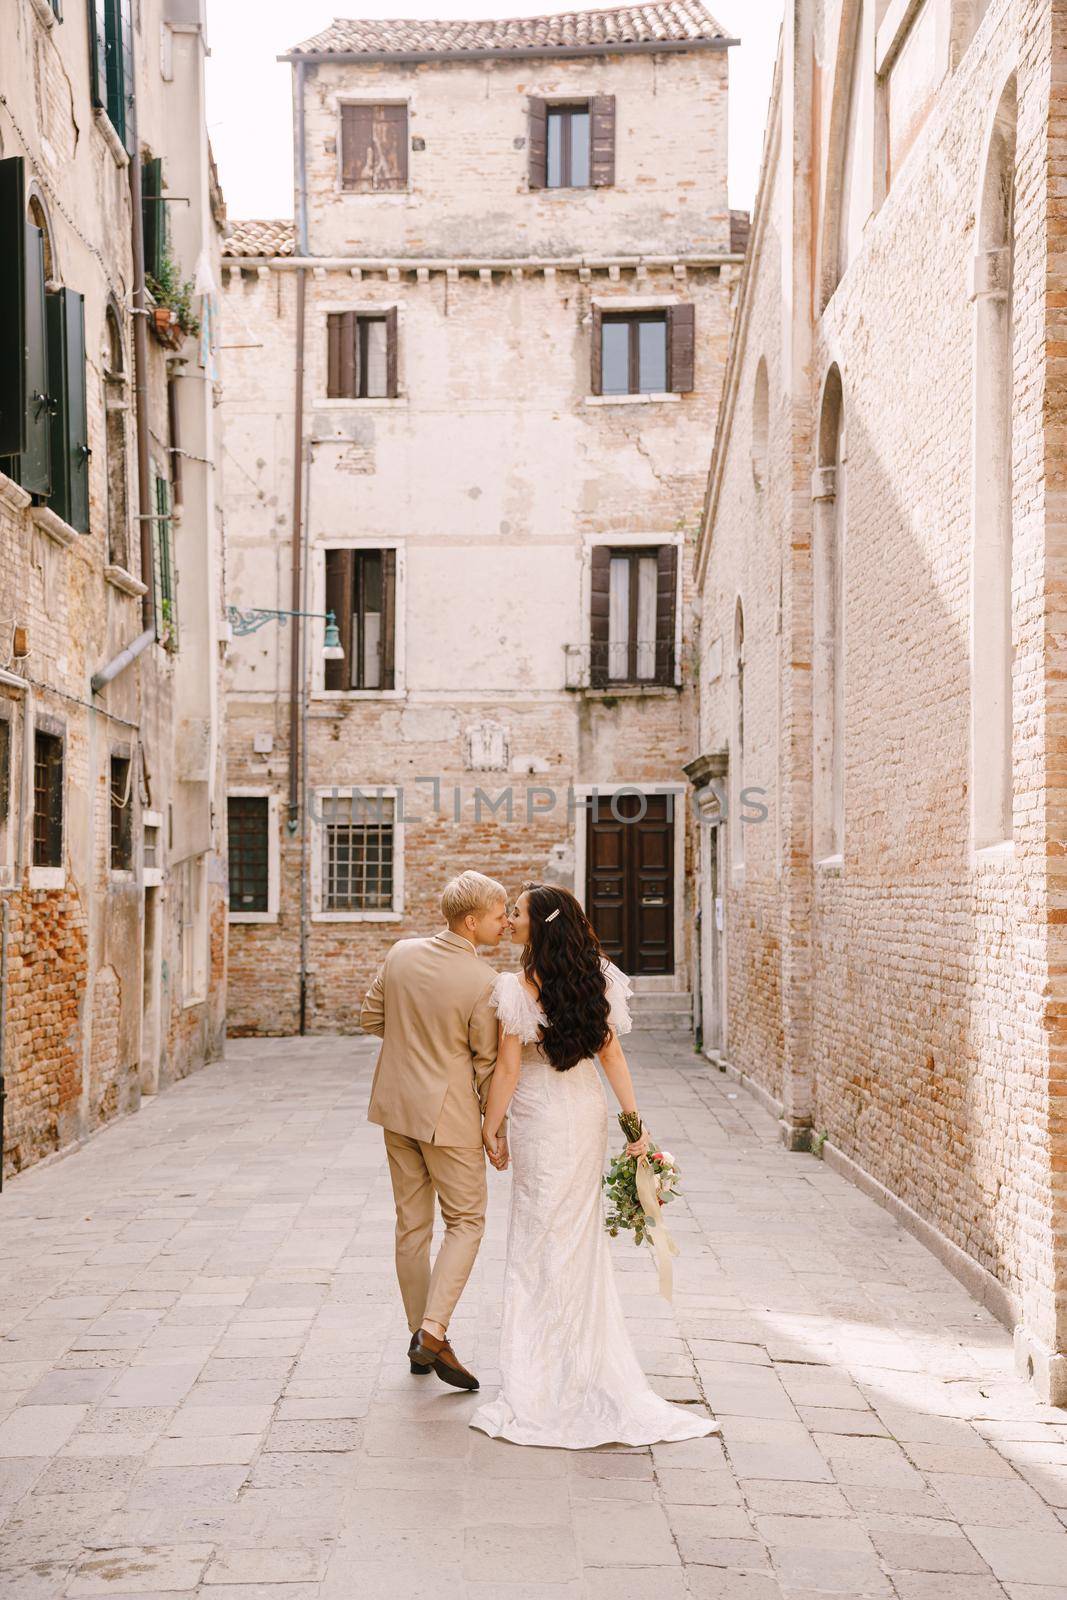 The bride and groom walk through the deserted streets of the city. Newlyweds walk in a dead-end alley against the background of brick buildings.